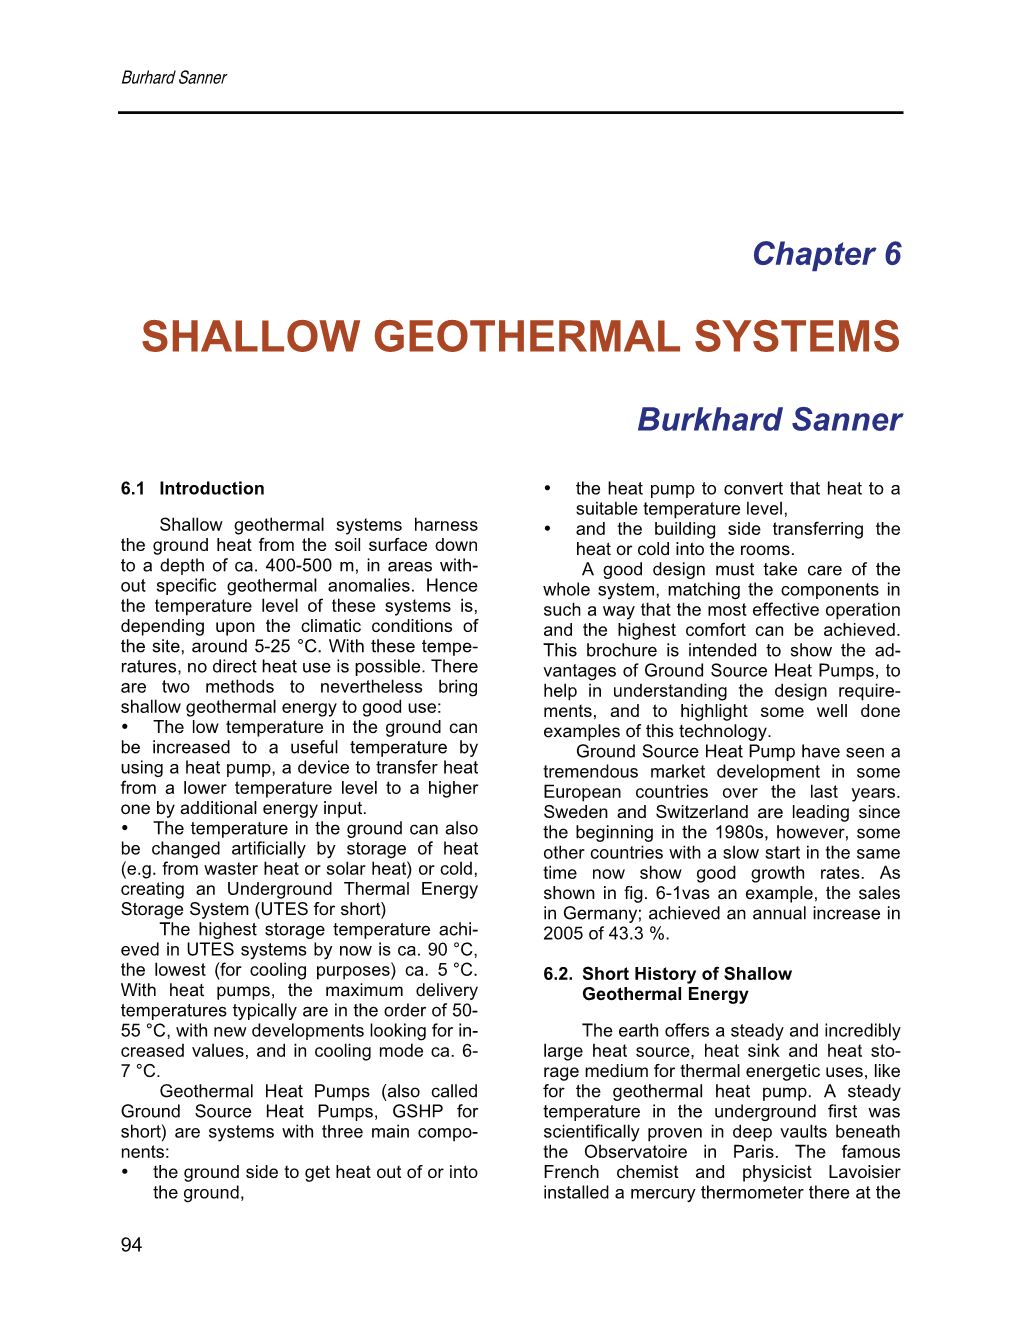 Shallow Geothermal Systems